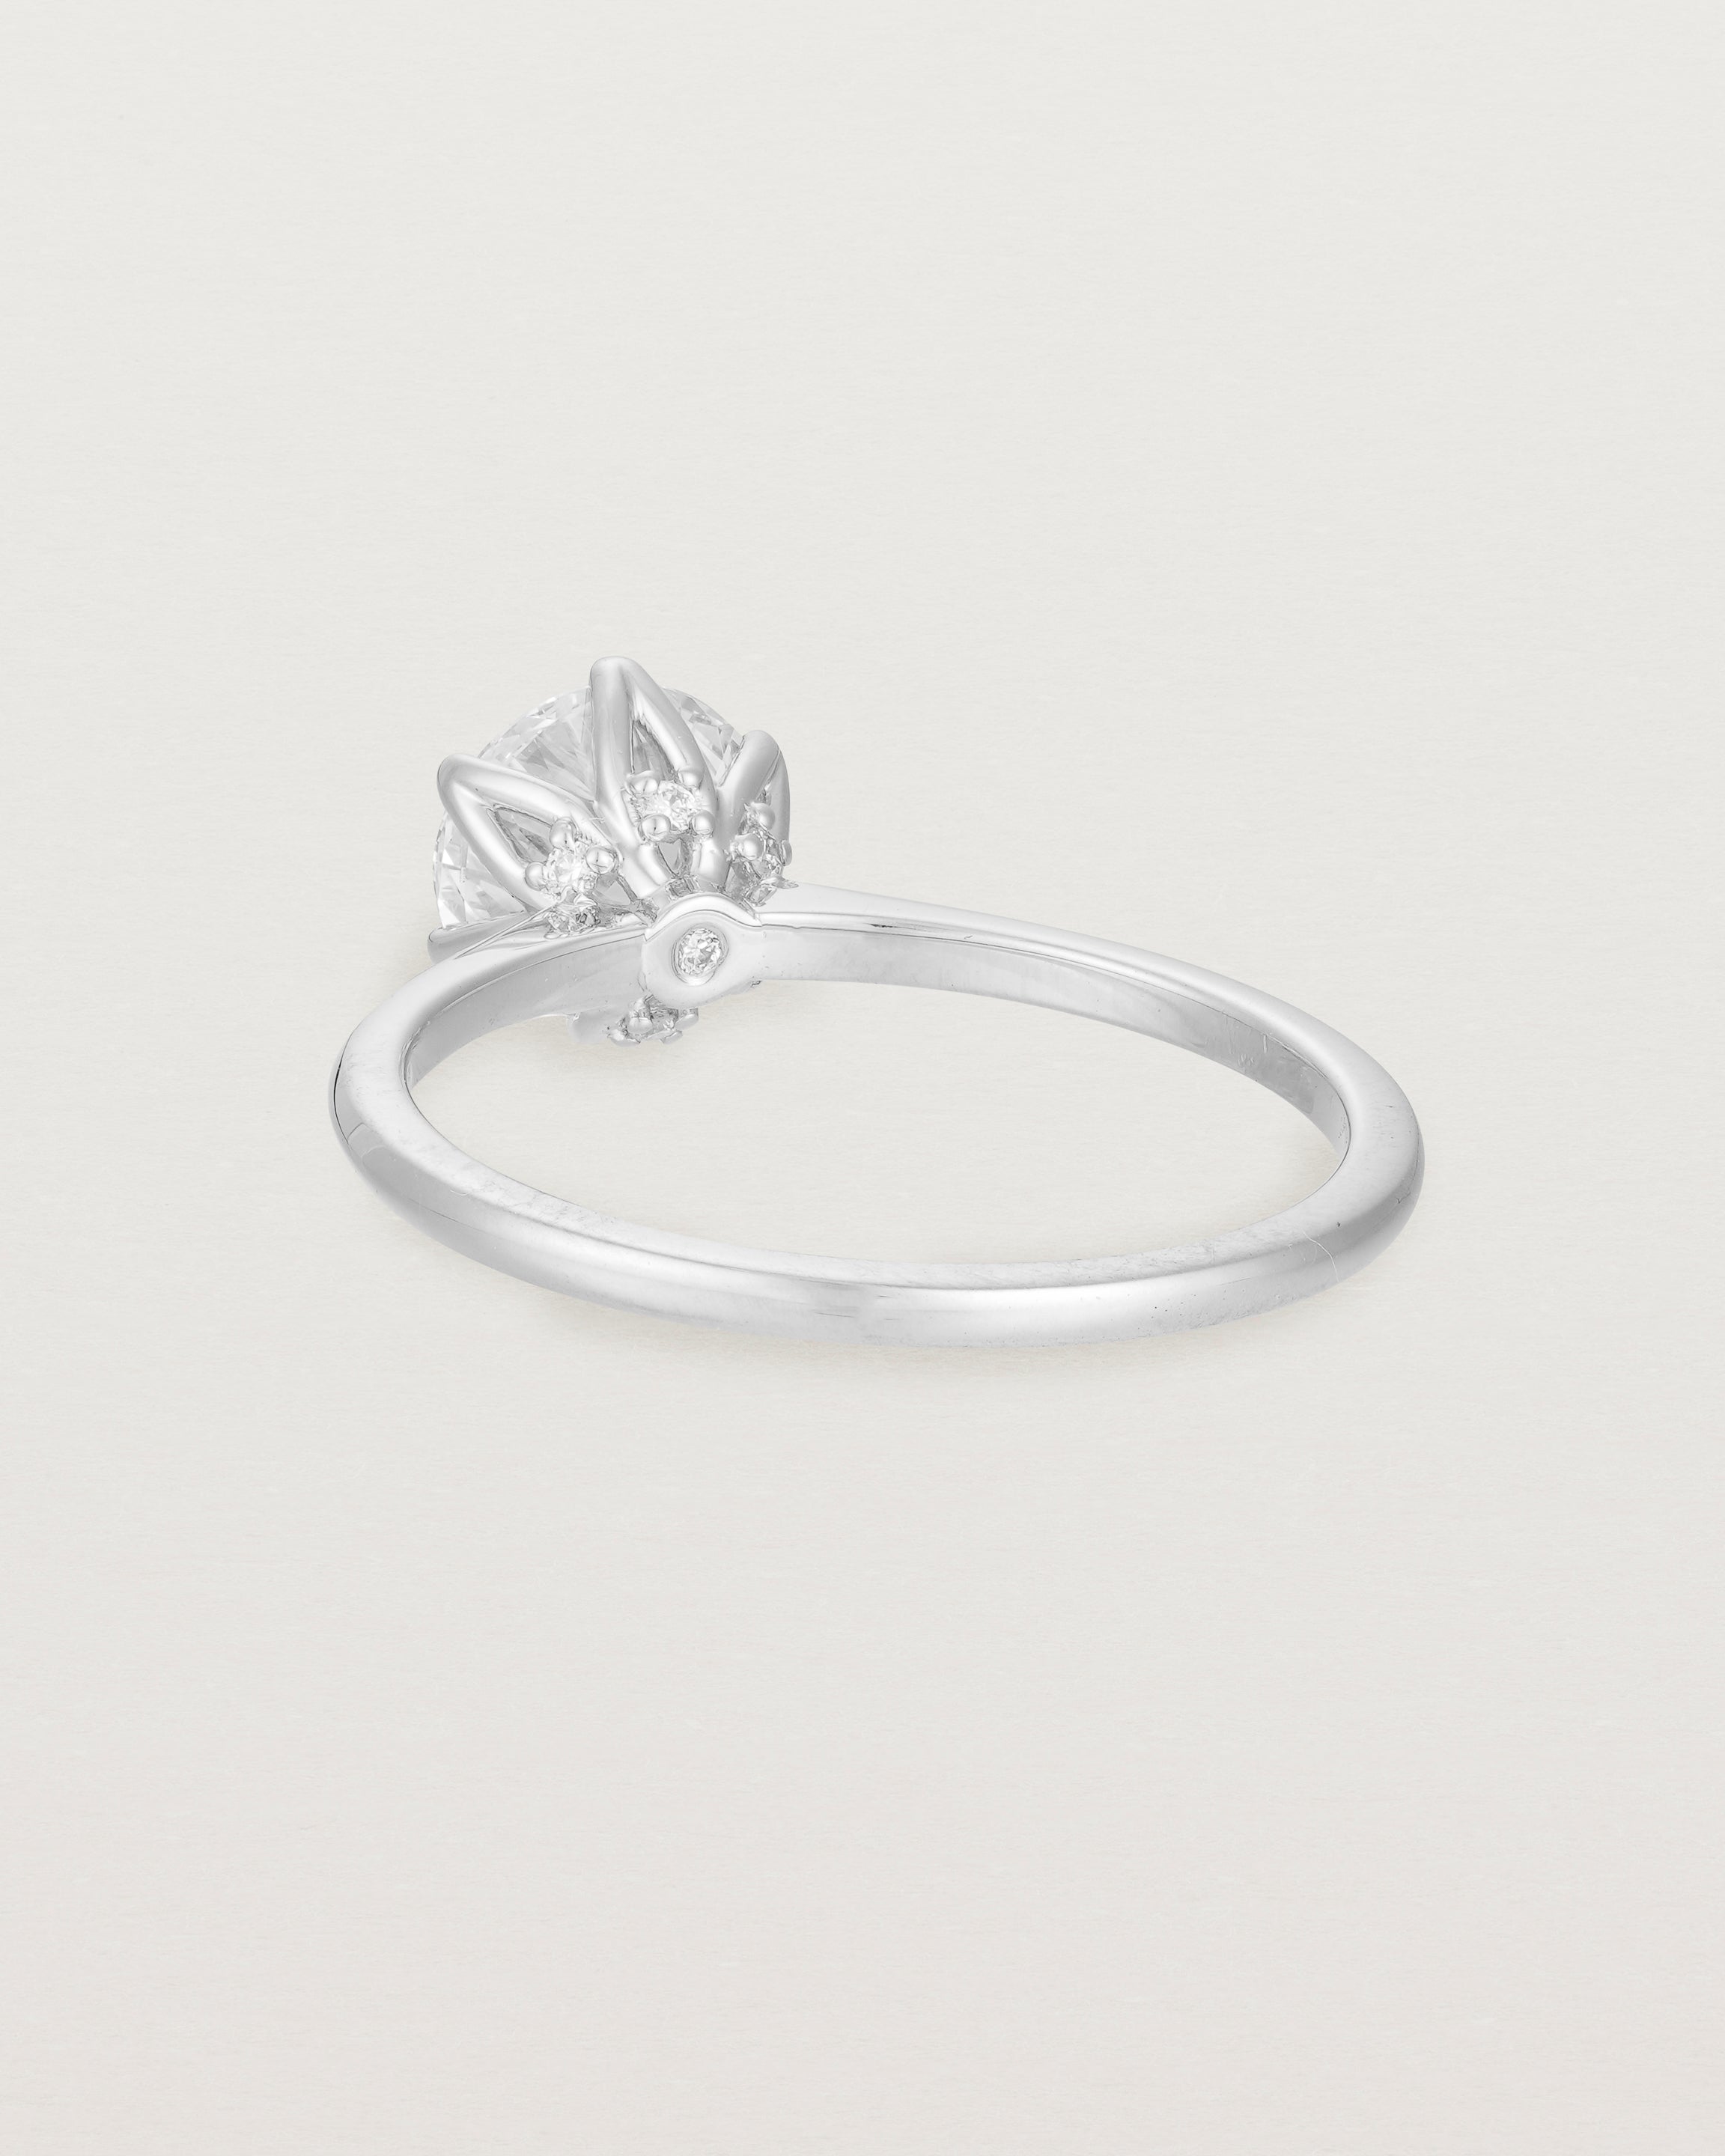 Back view of the  Solitaire Ring | Laboratory Grown Diamonds | White Gold